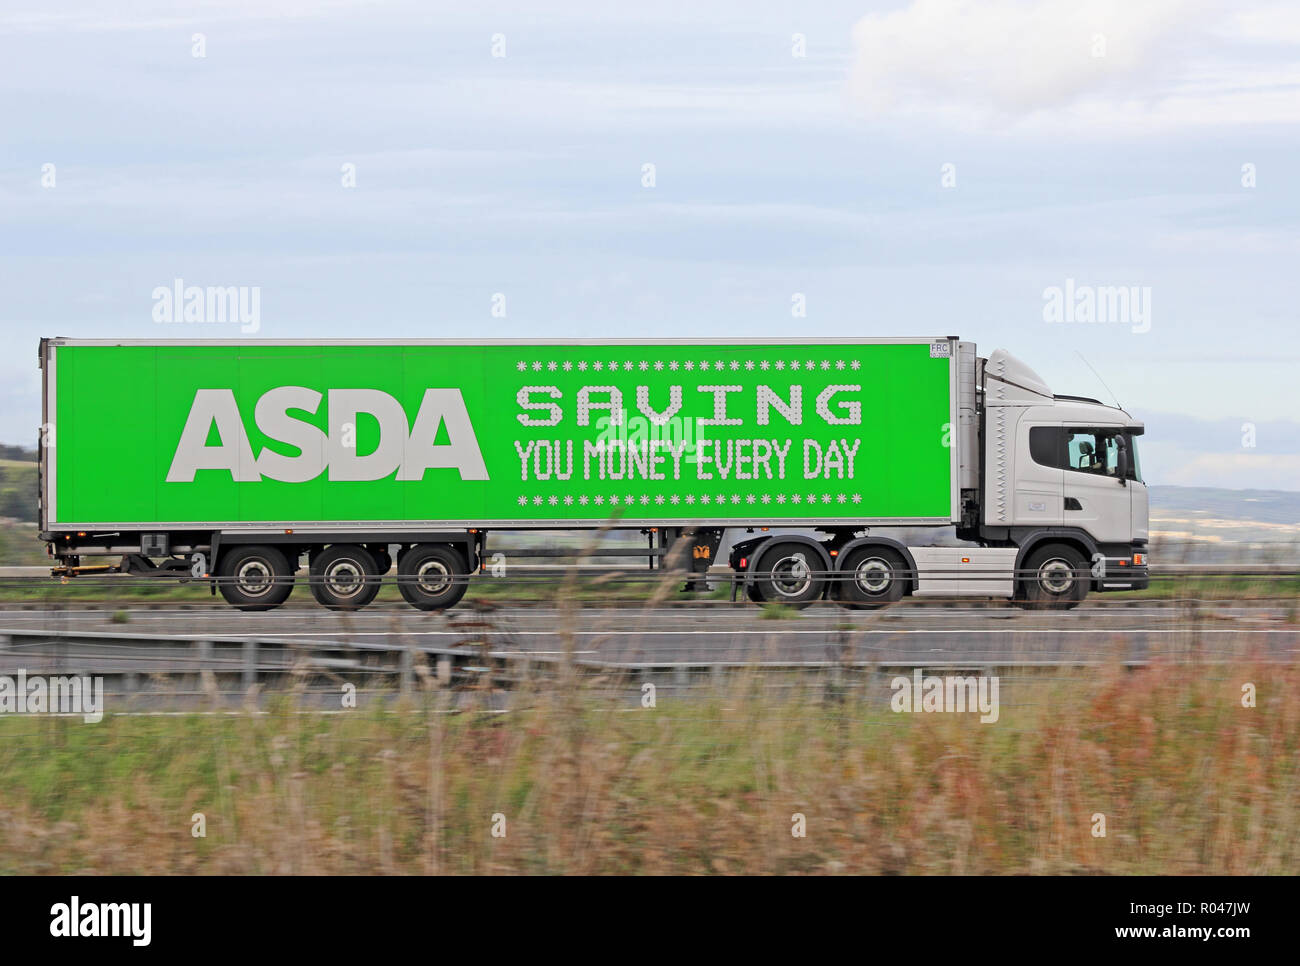 Asda supermarket articulated truck travelling on M62 motorway Stock Photo